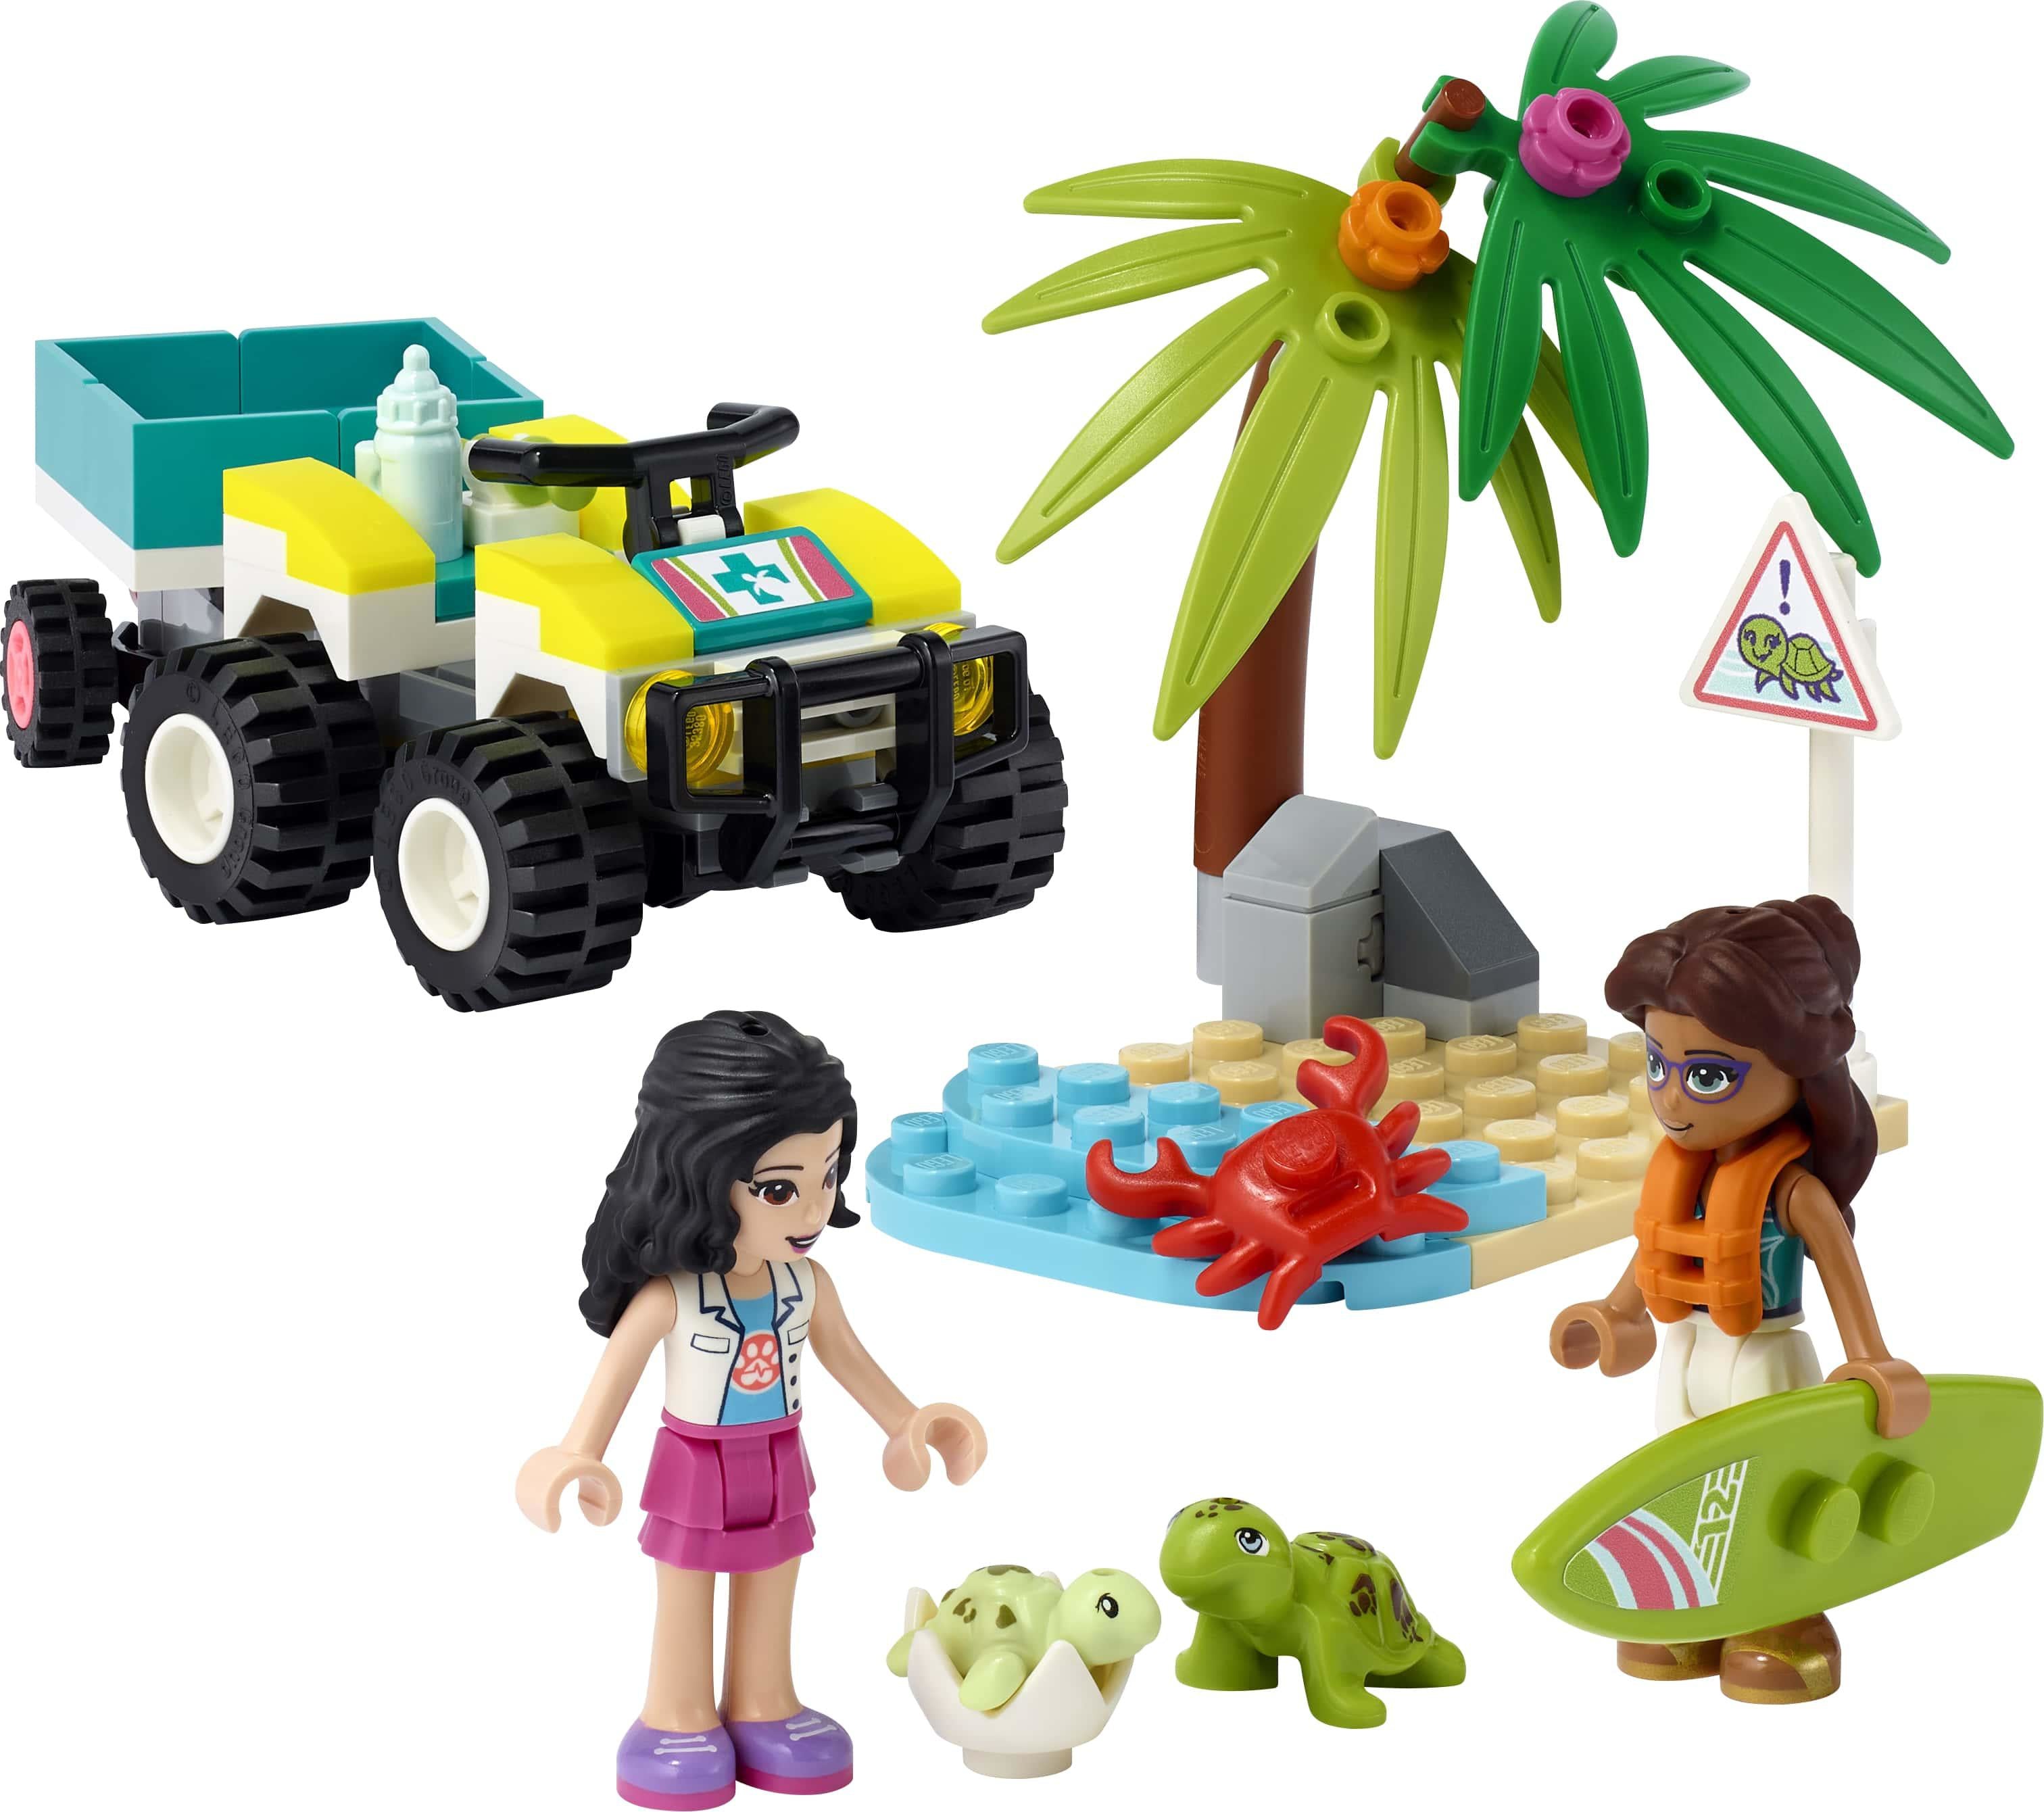 LEGO 41697 Friends Turtle Protection Vehicle, Sea Animal Rescue Toy for Kids 6 Years Old, Beach ATV Car with Trailer Building Set, Summer Series